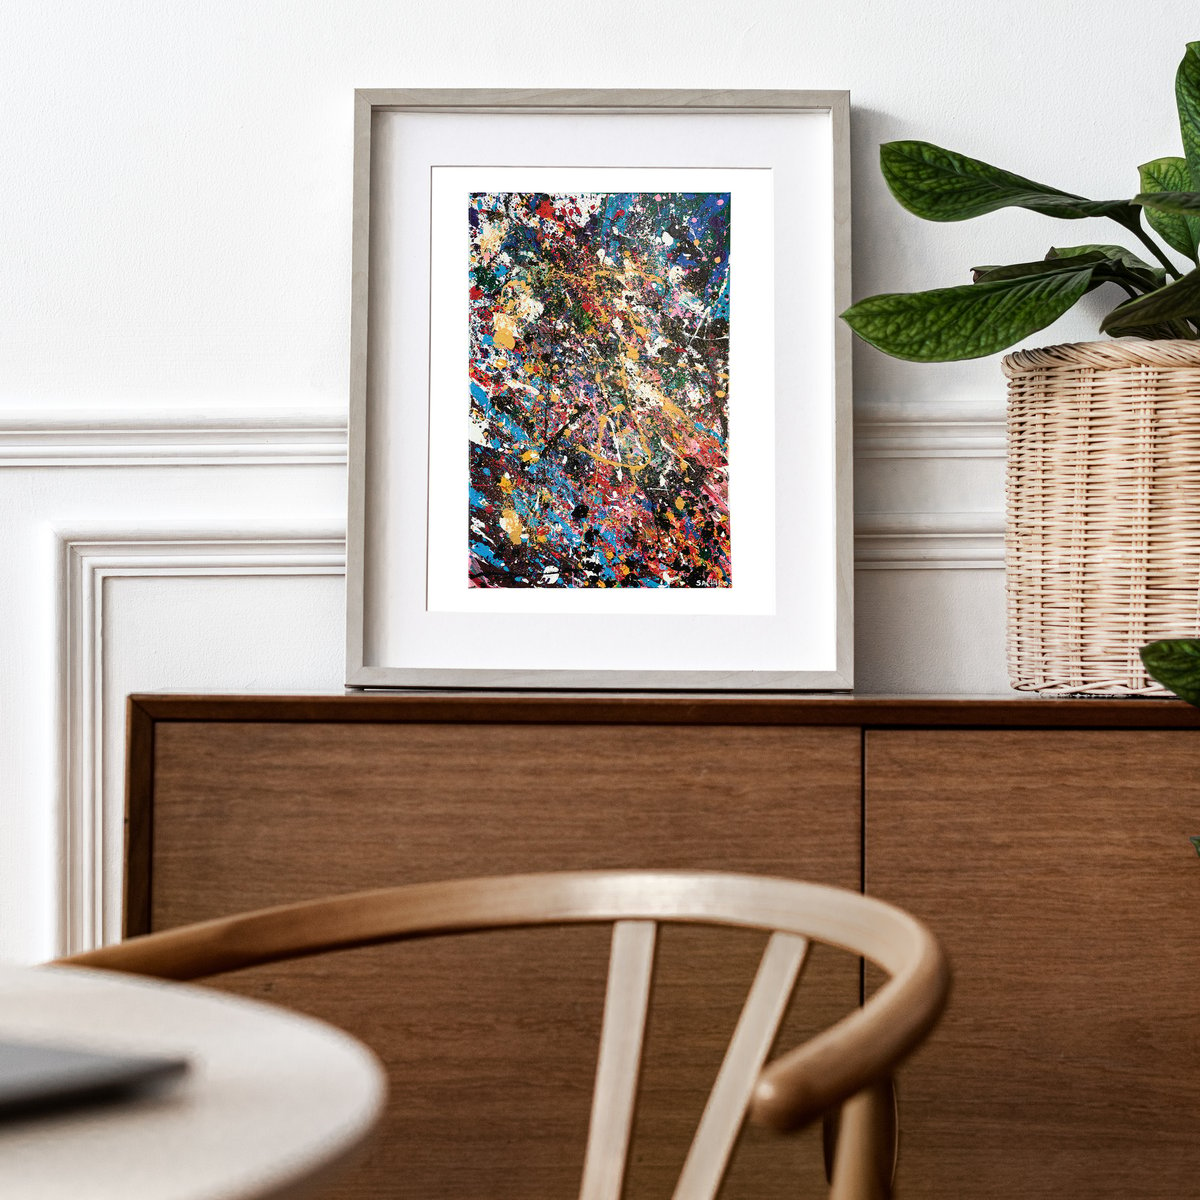 Image of This is Pride - Introduction Collection - Open Edition Art Prints